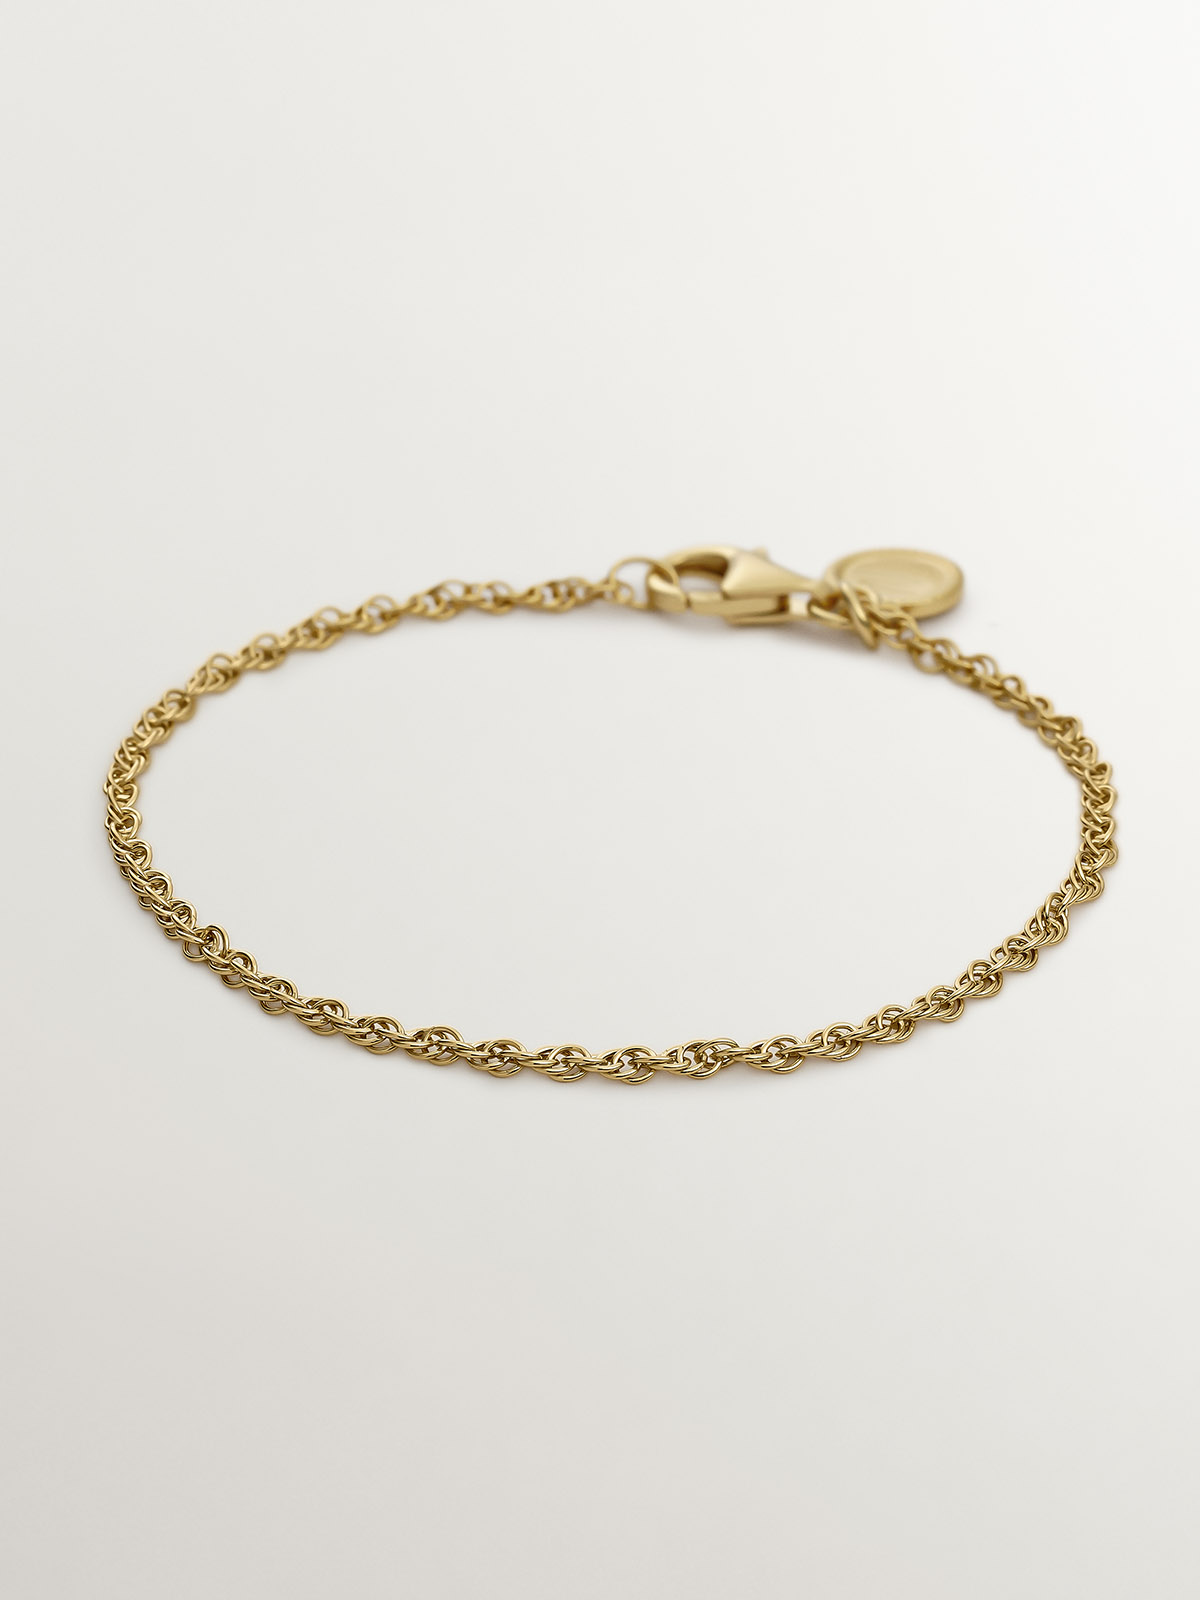 925 Silver rope link bracelet bathed in 18K yellow gold.